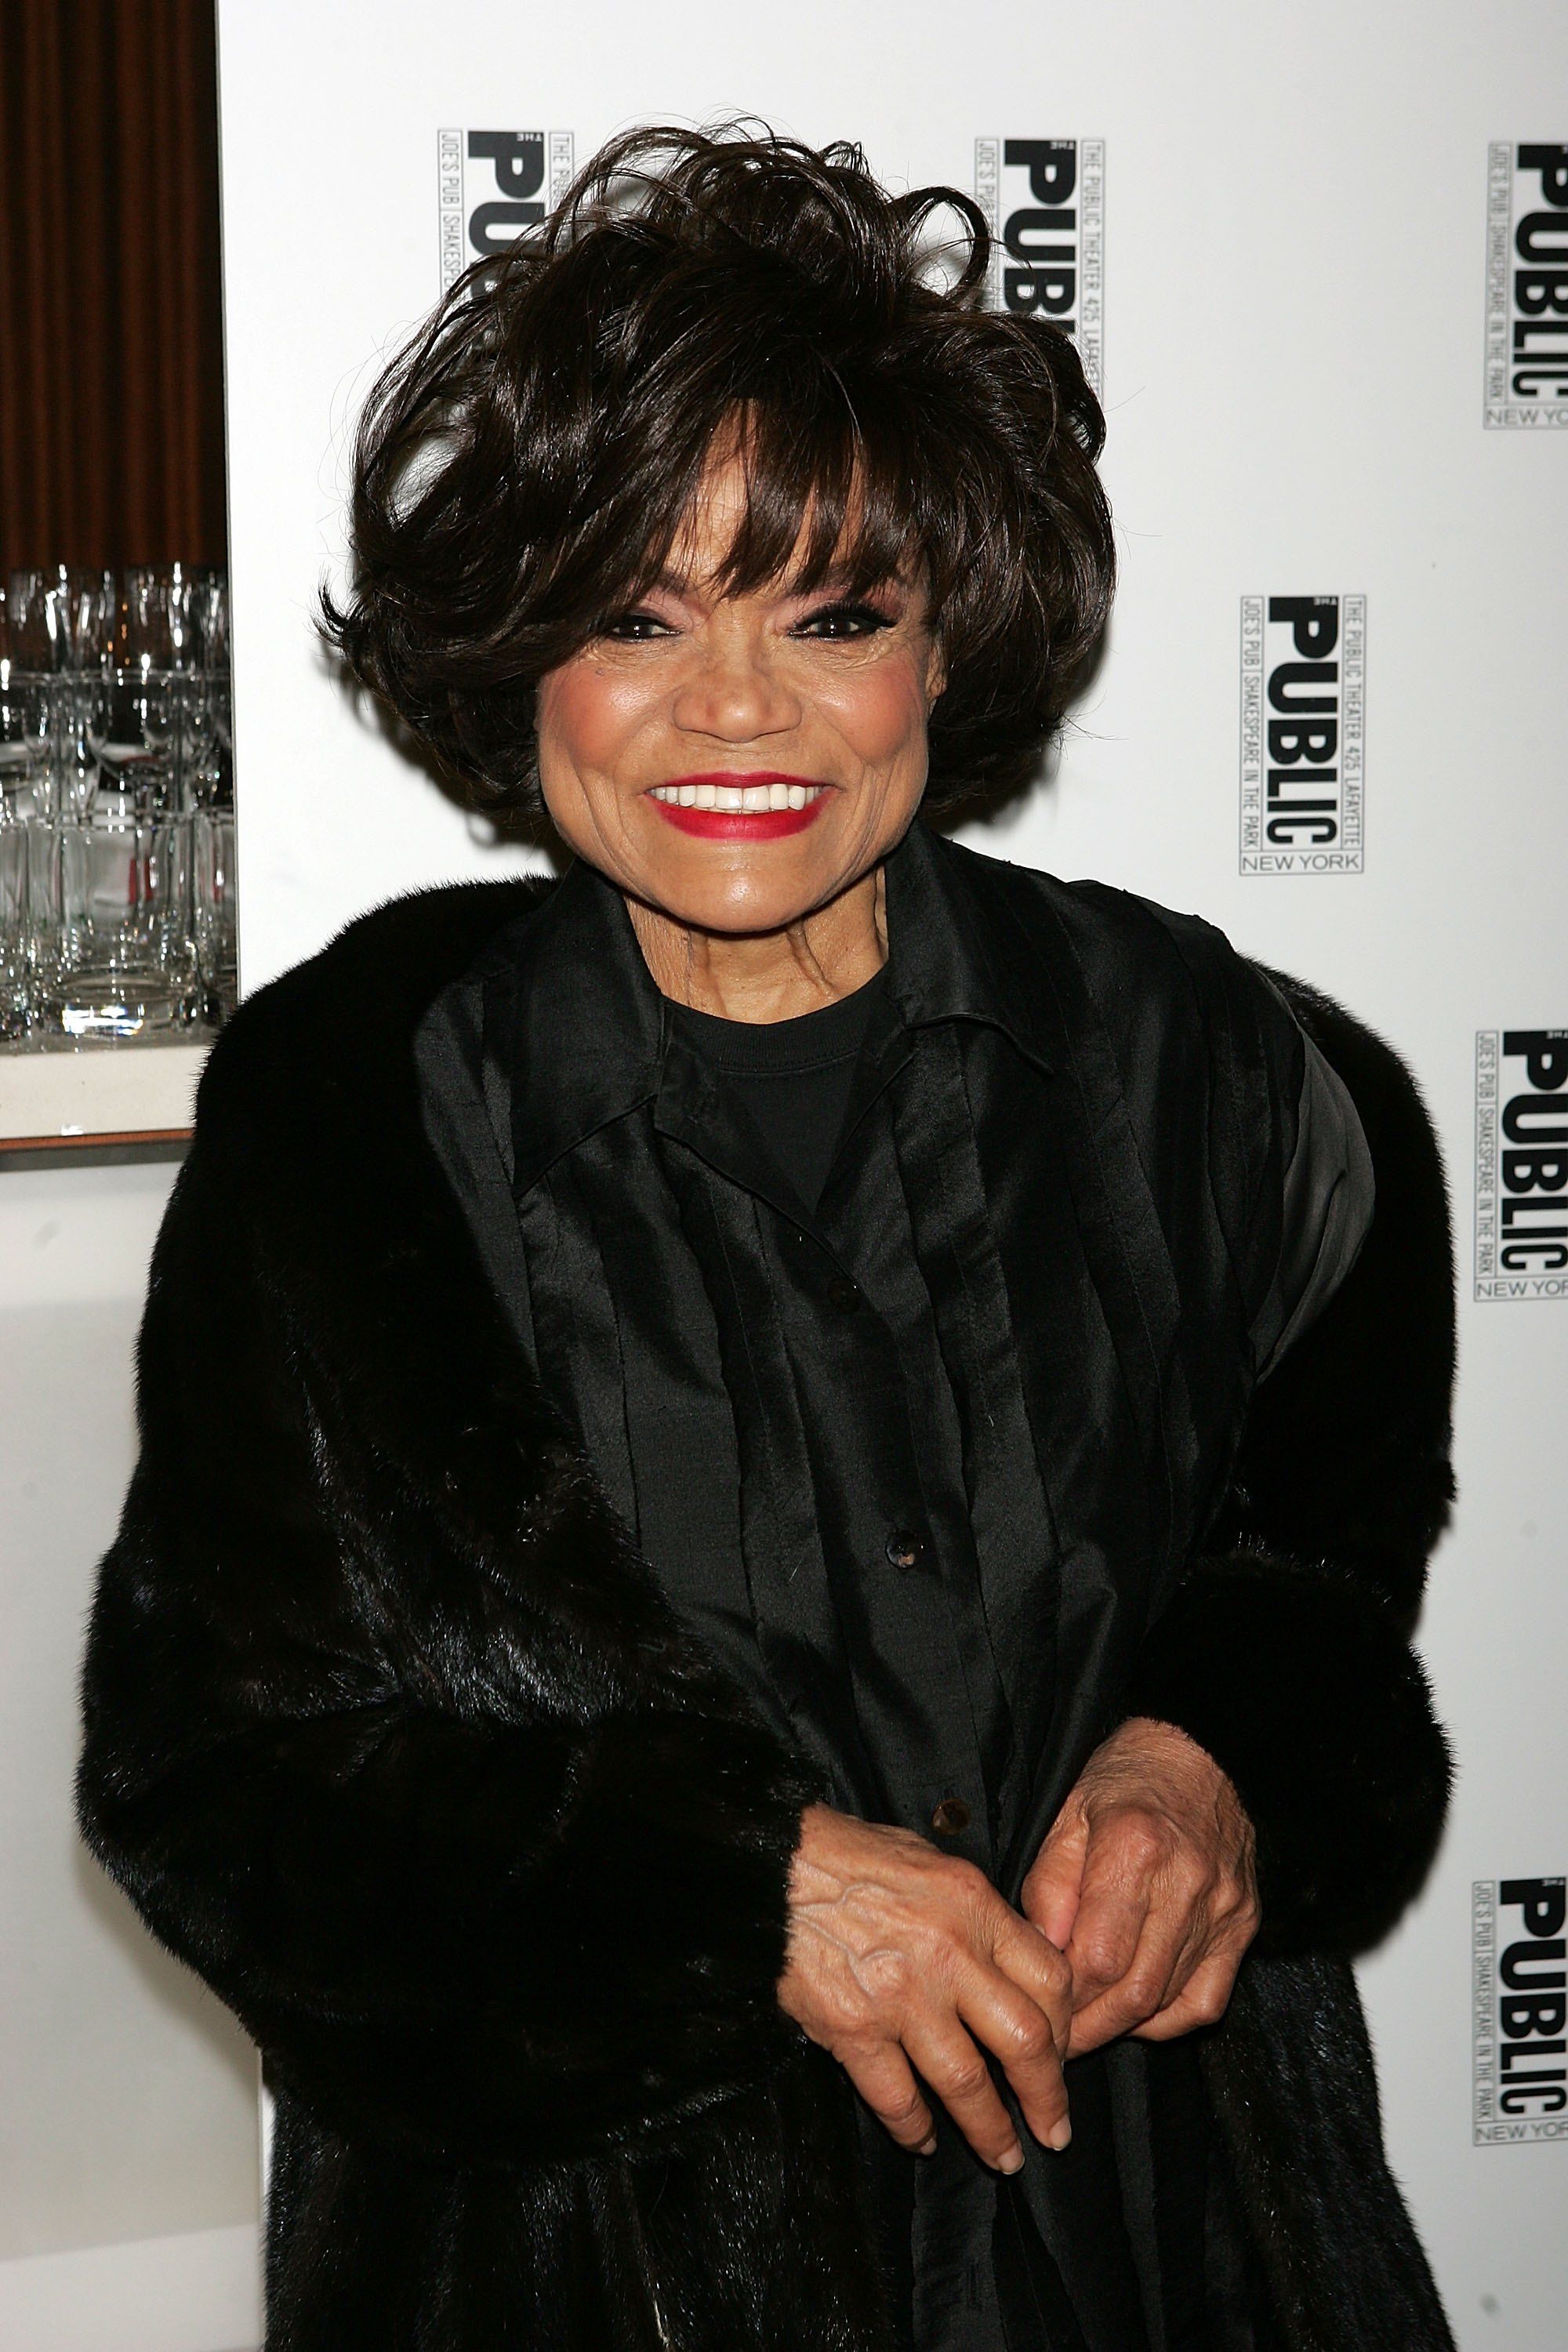 Eartha Kitt at the after-party for "The Public Sings: A 50th Anniversary Celebration" at the Time Warner Center on January 30, 2006 in New York City | Photo: Getty Images